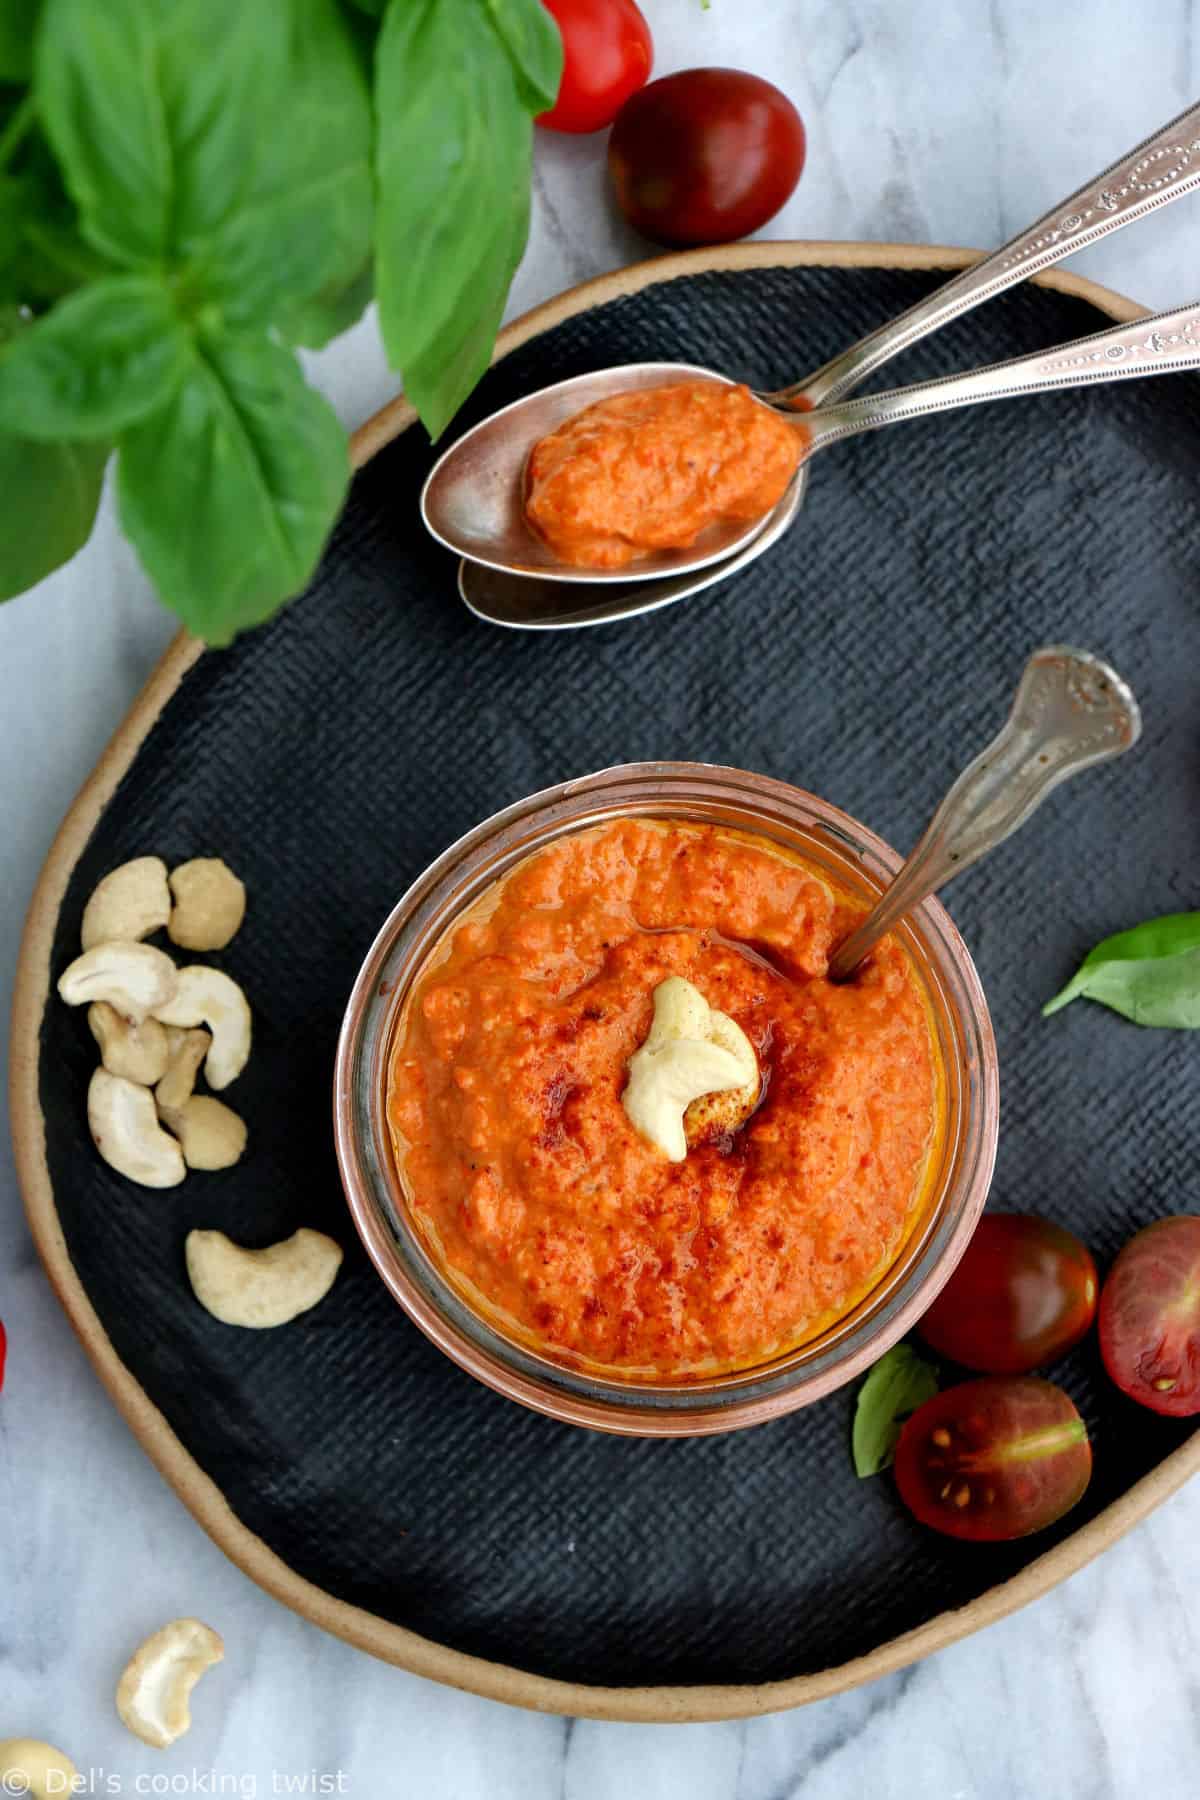 This rich and creamy cashew romesco sauce is nutty, smoky, and adds burst of flavors to any dish.